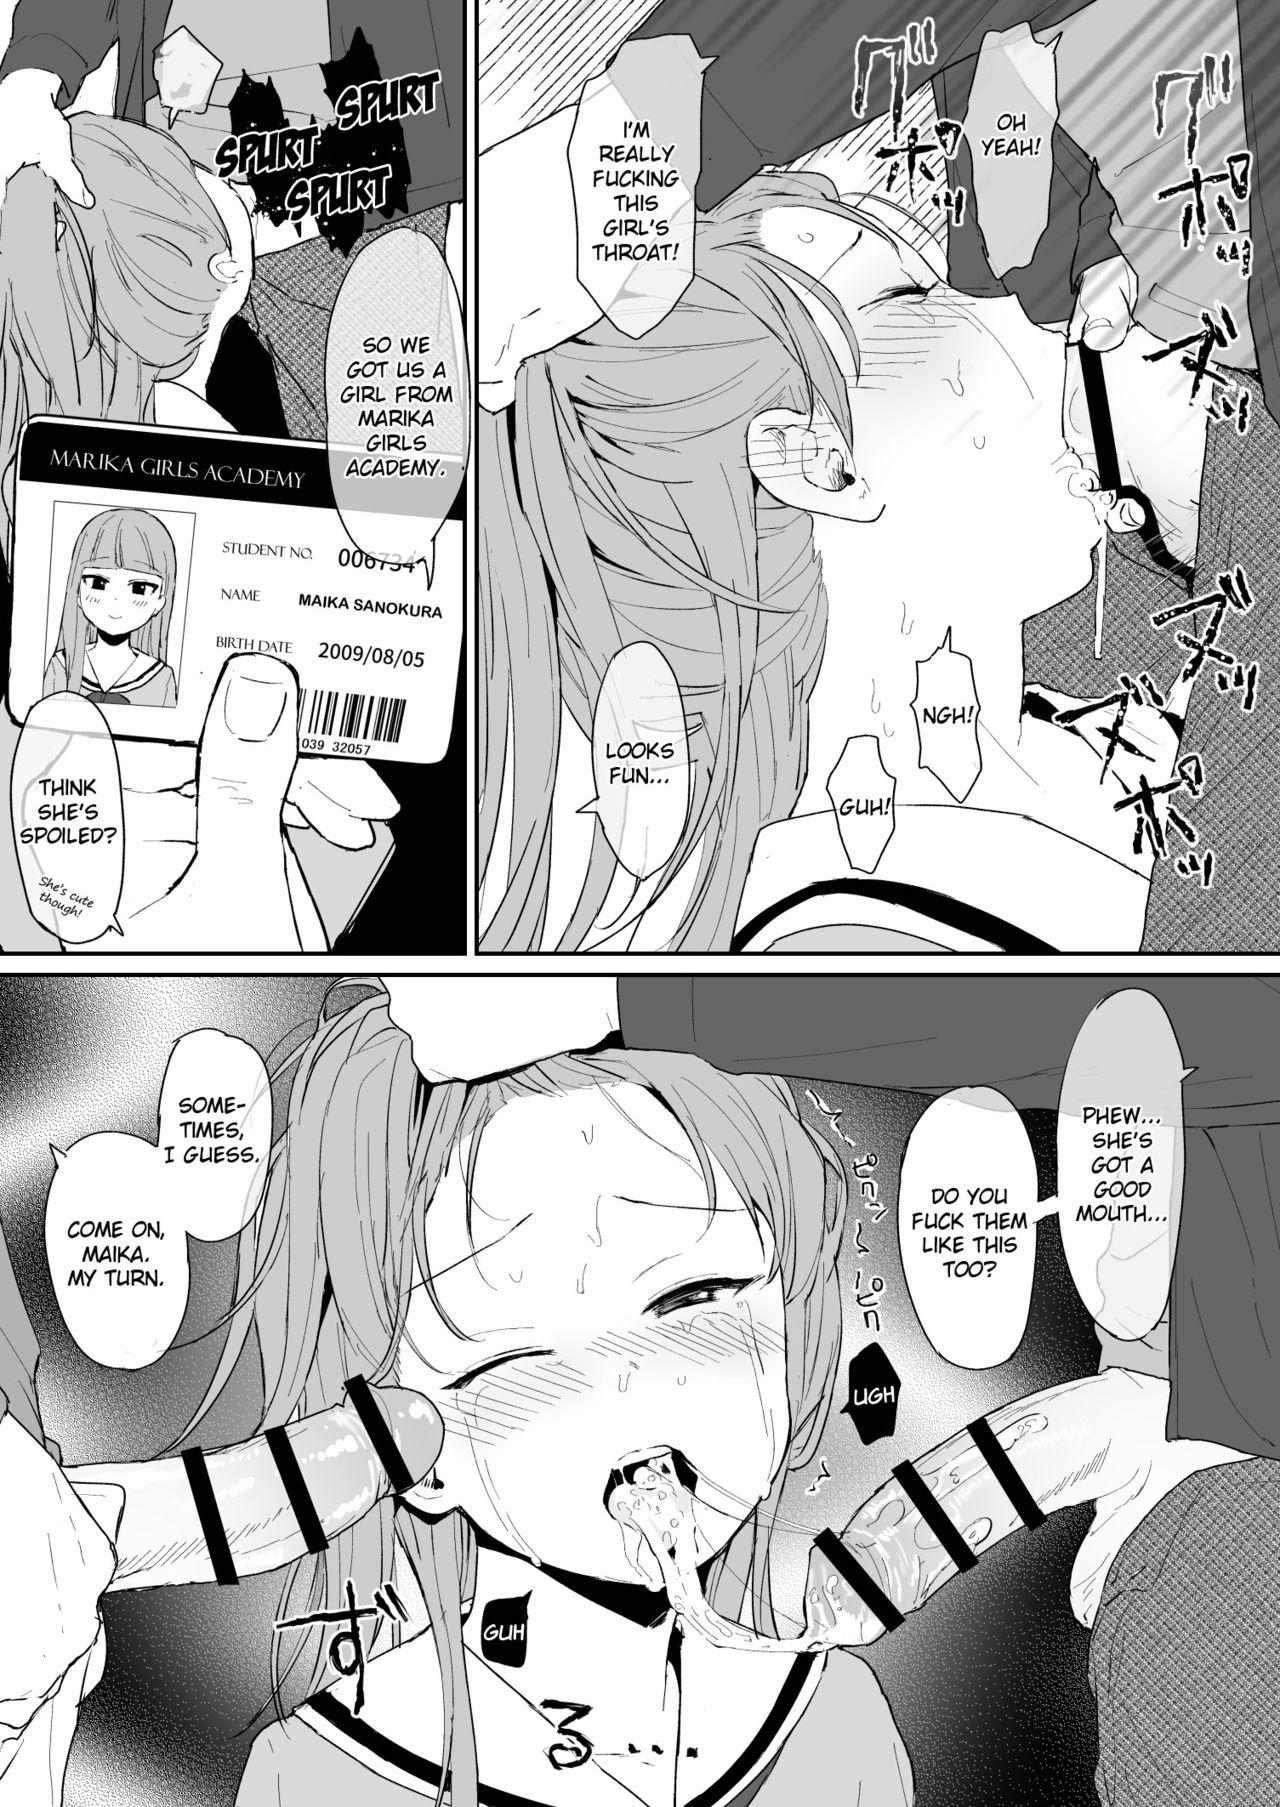 Small Boobs fragile - Original Friends - Page 4